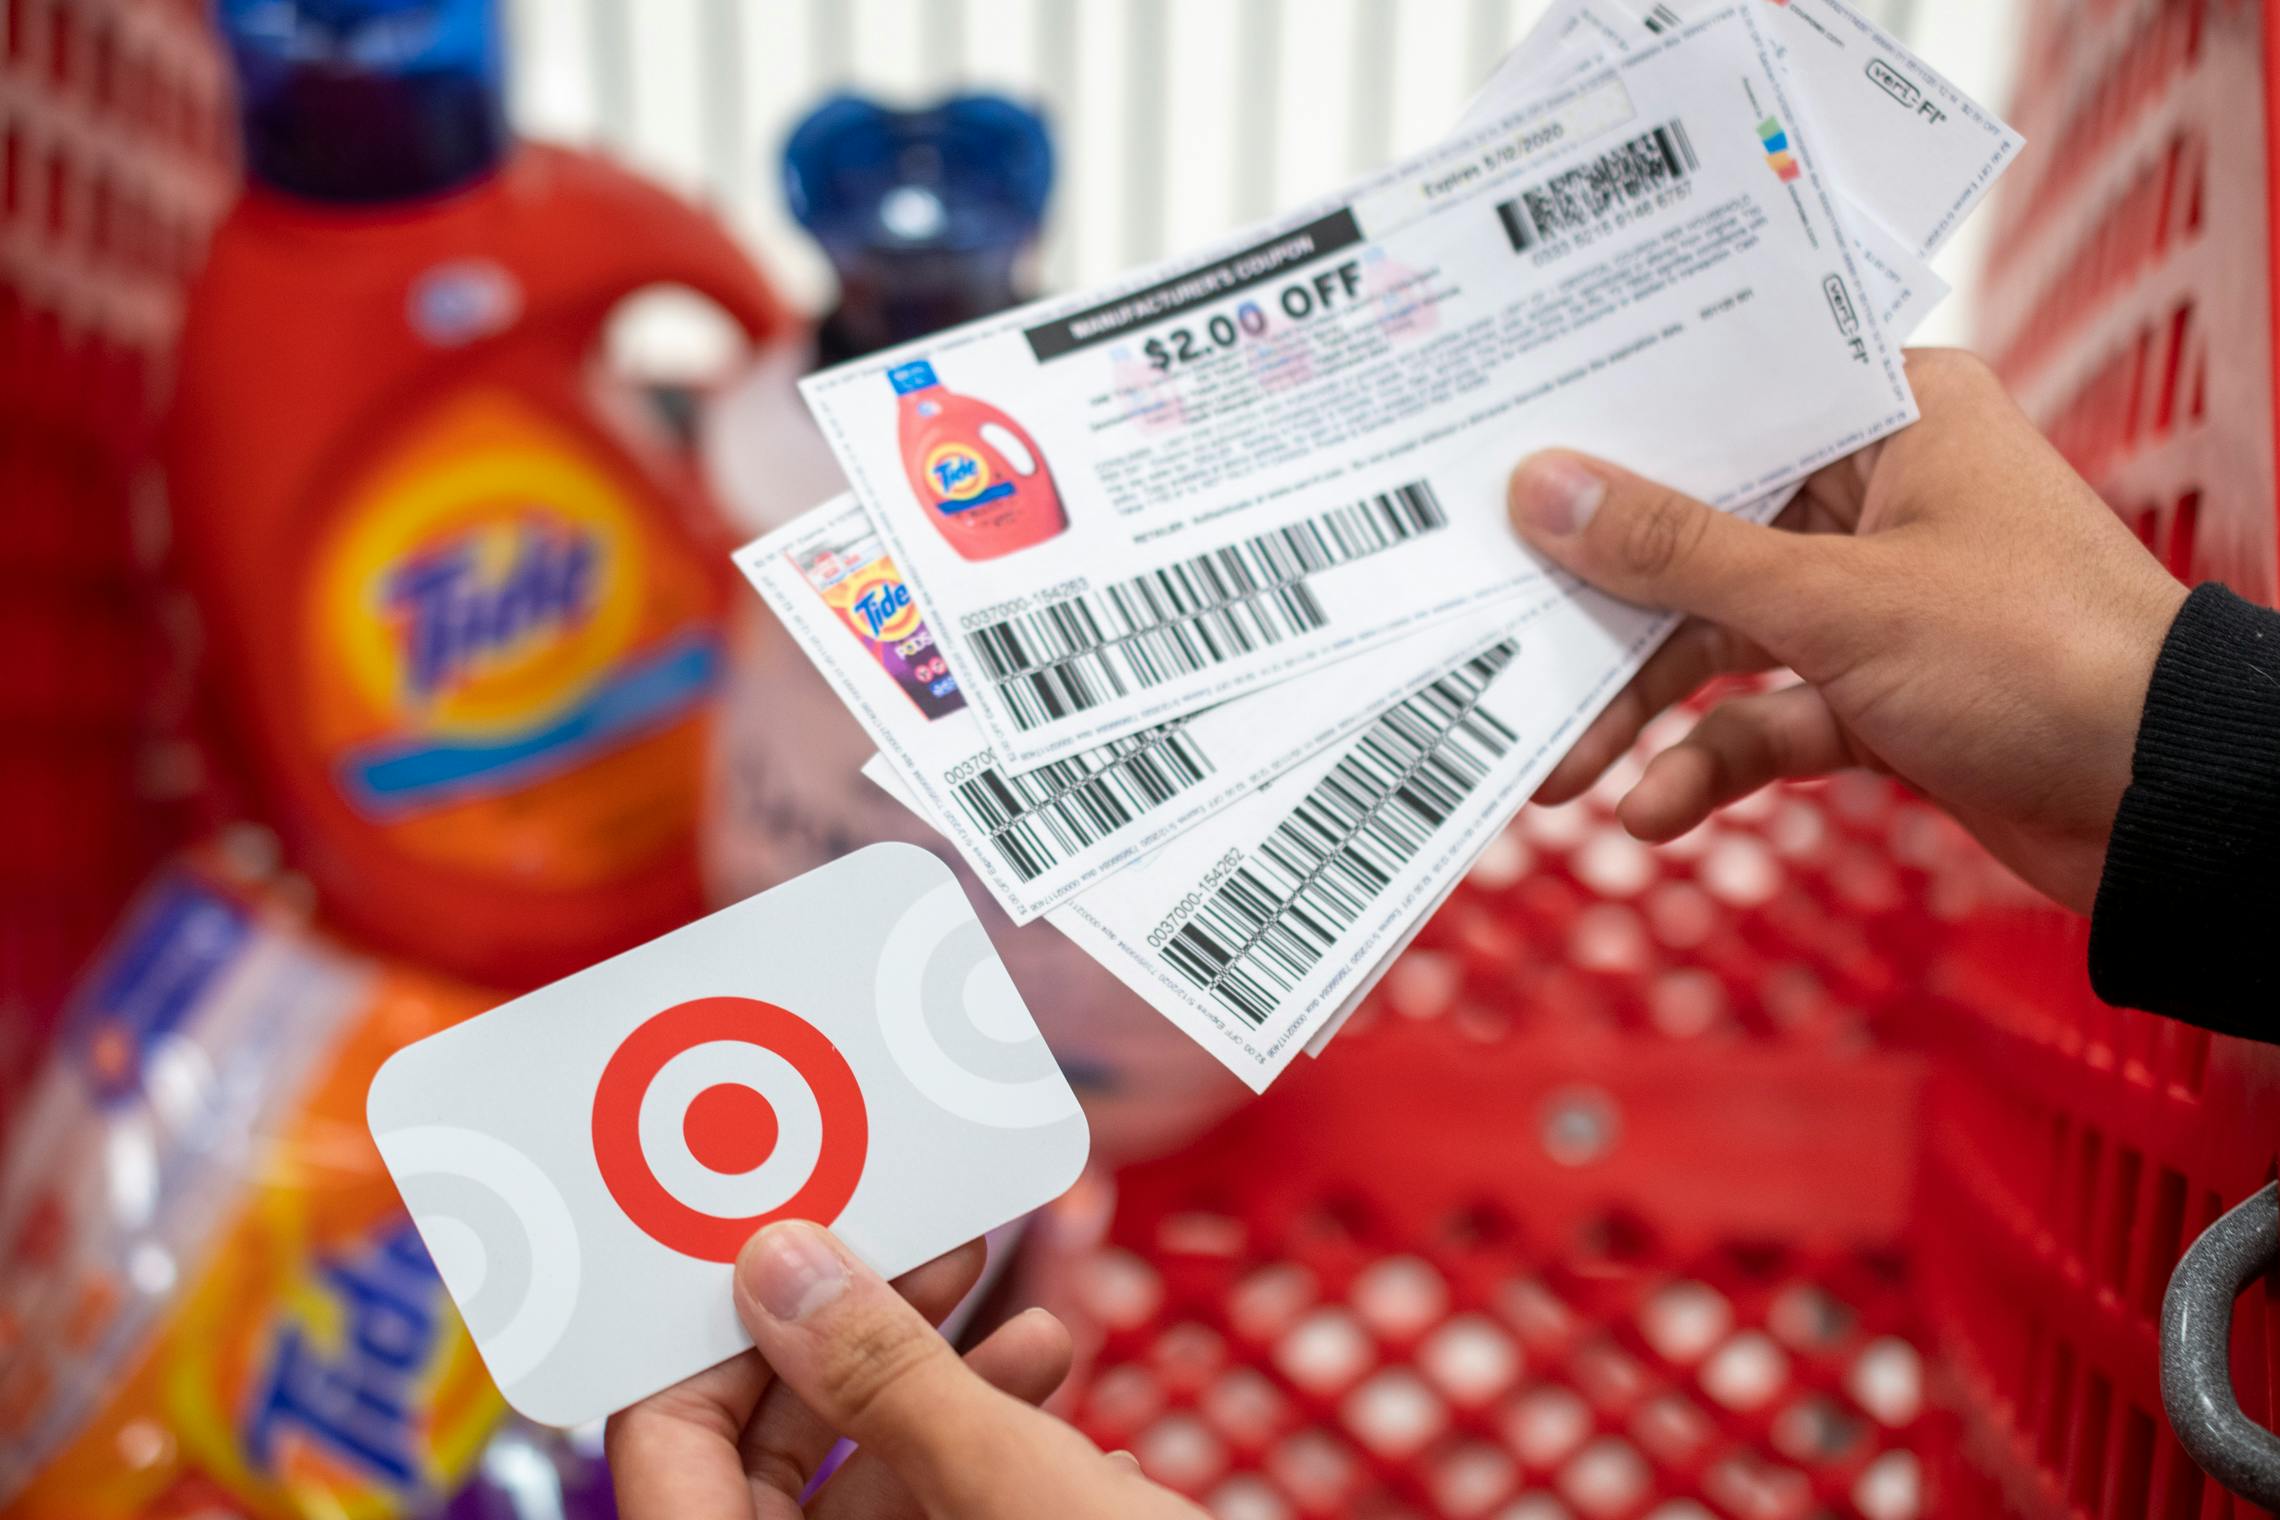 A person holding tide manufacture coupons in one hand and a Target gift card in the other, with a shopping card containing laundry detergents in the background.